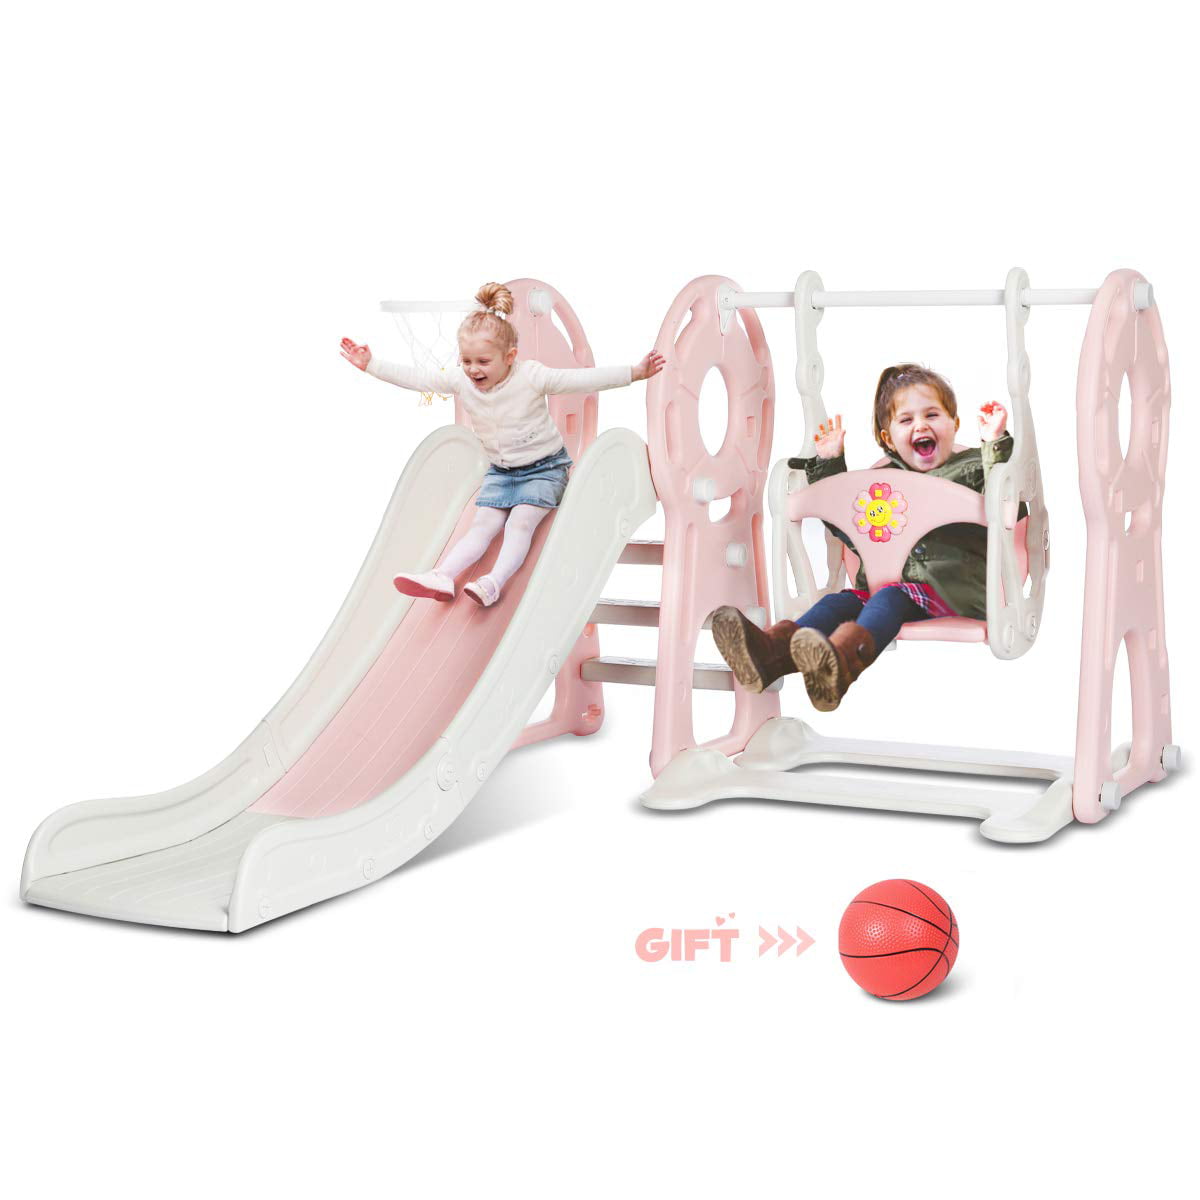 4IN1 Toddler Climber Slide Play Swing Set Kids Playground Baby Toy Outdoor Home 